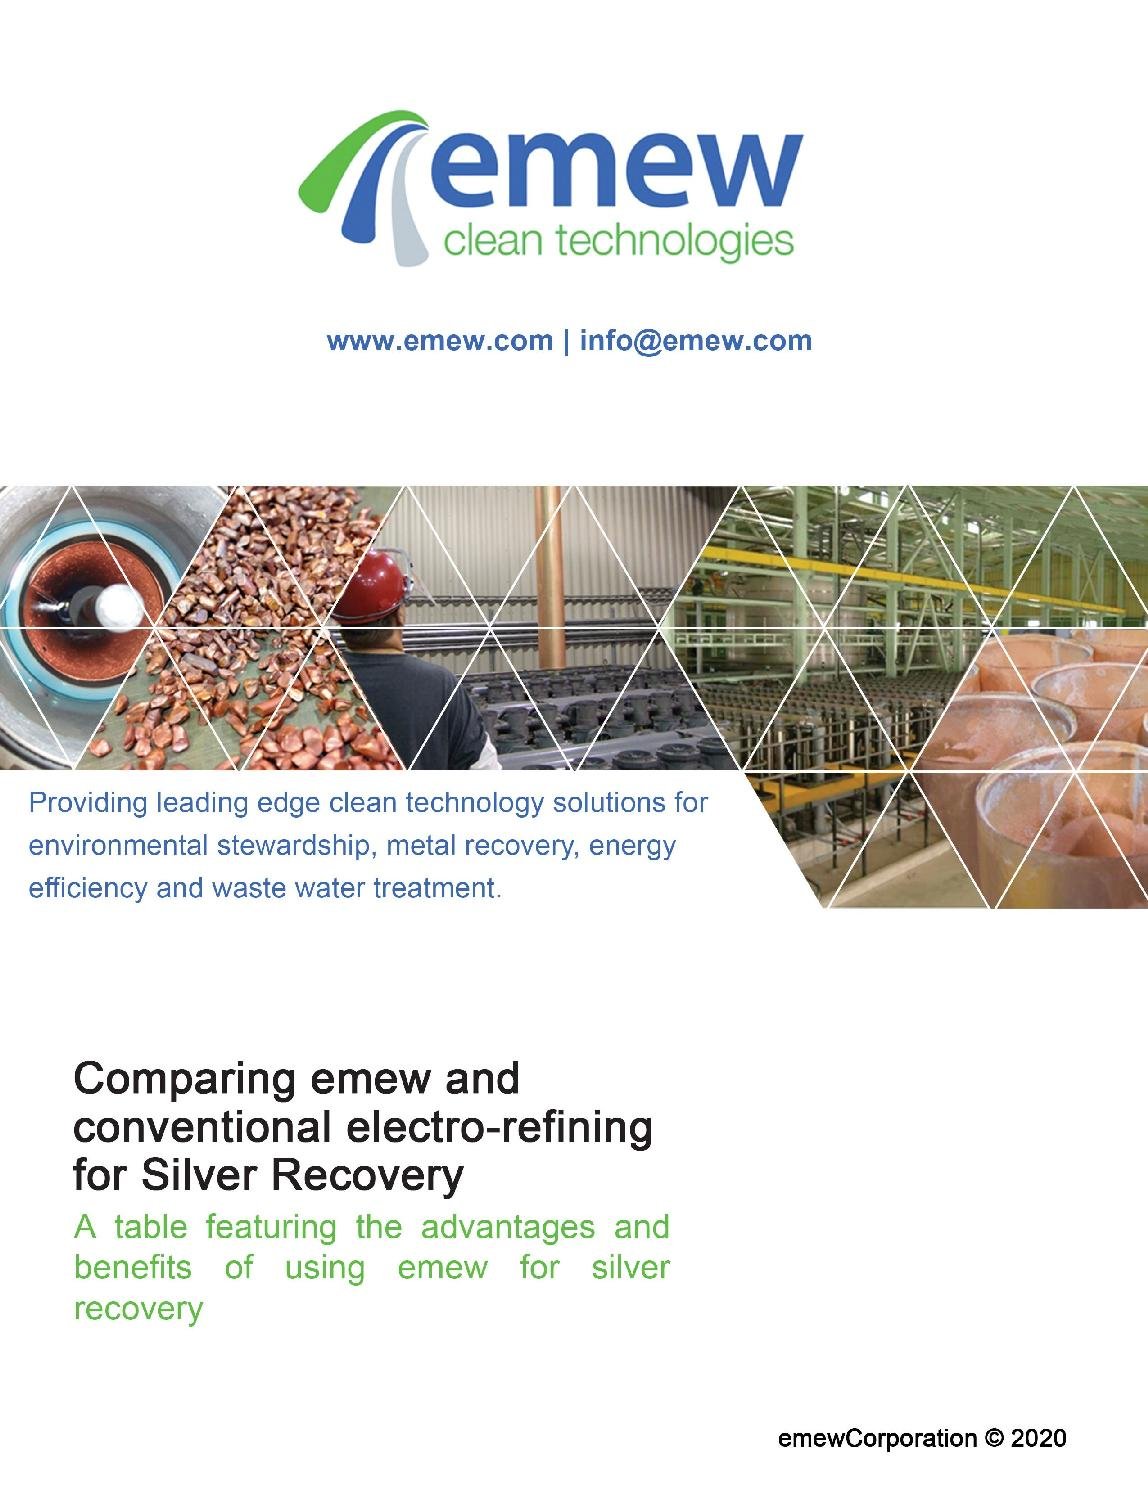 Comparing emew and conventional electro-refining for Silver Recovery